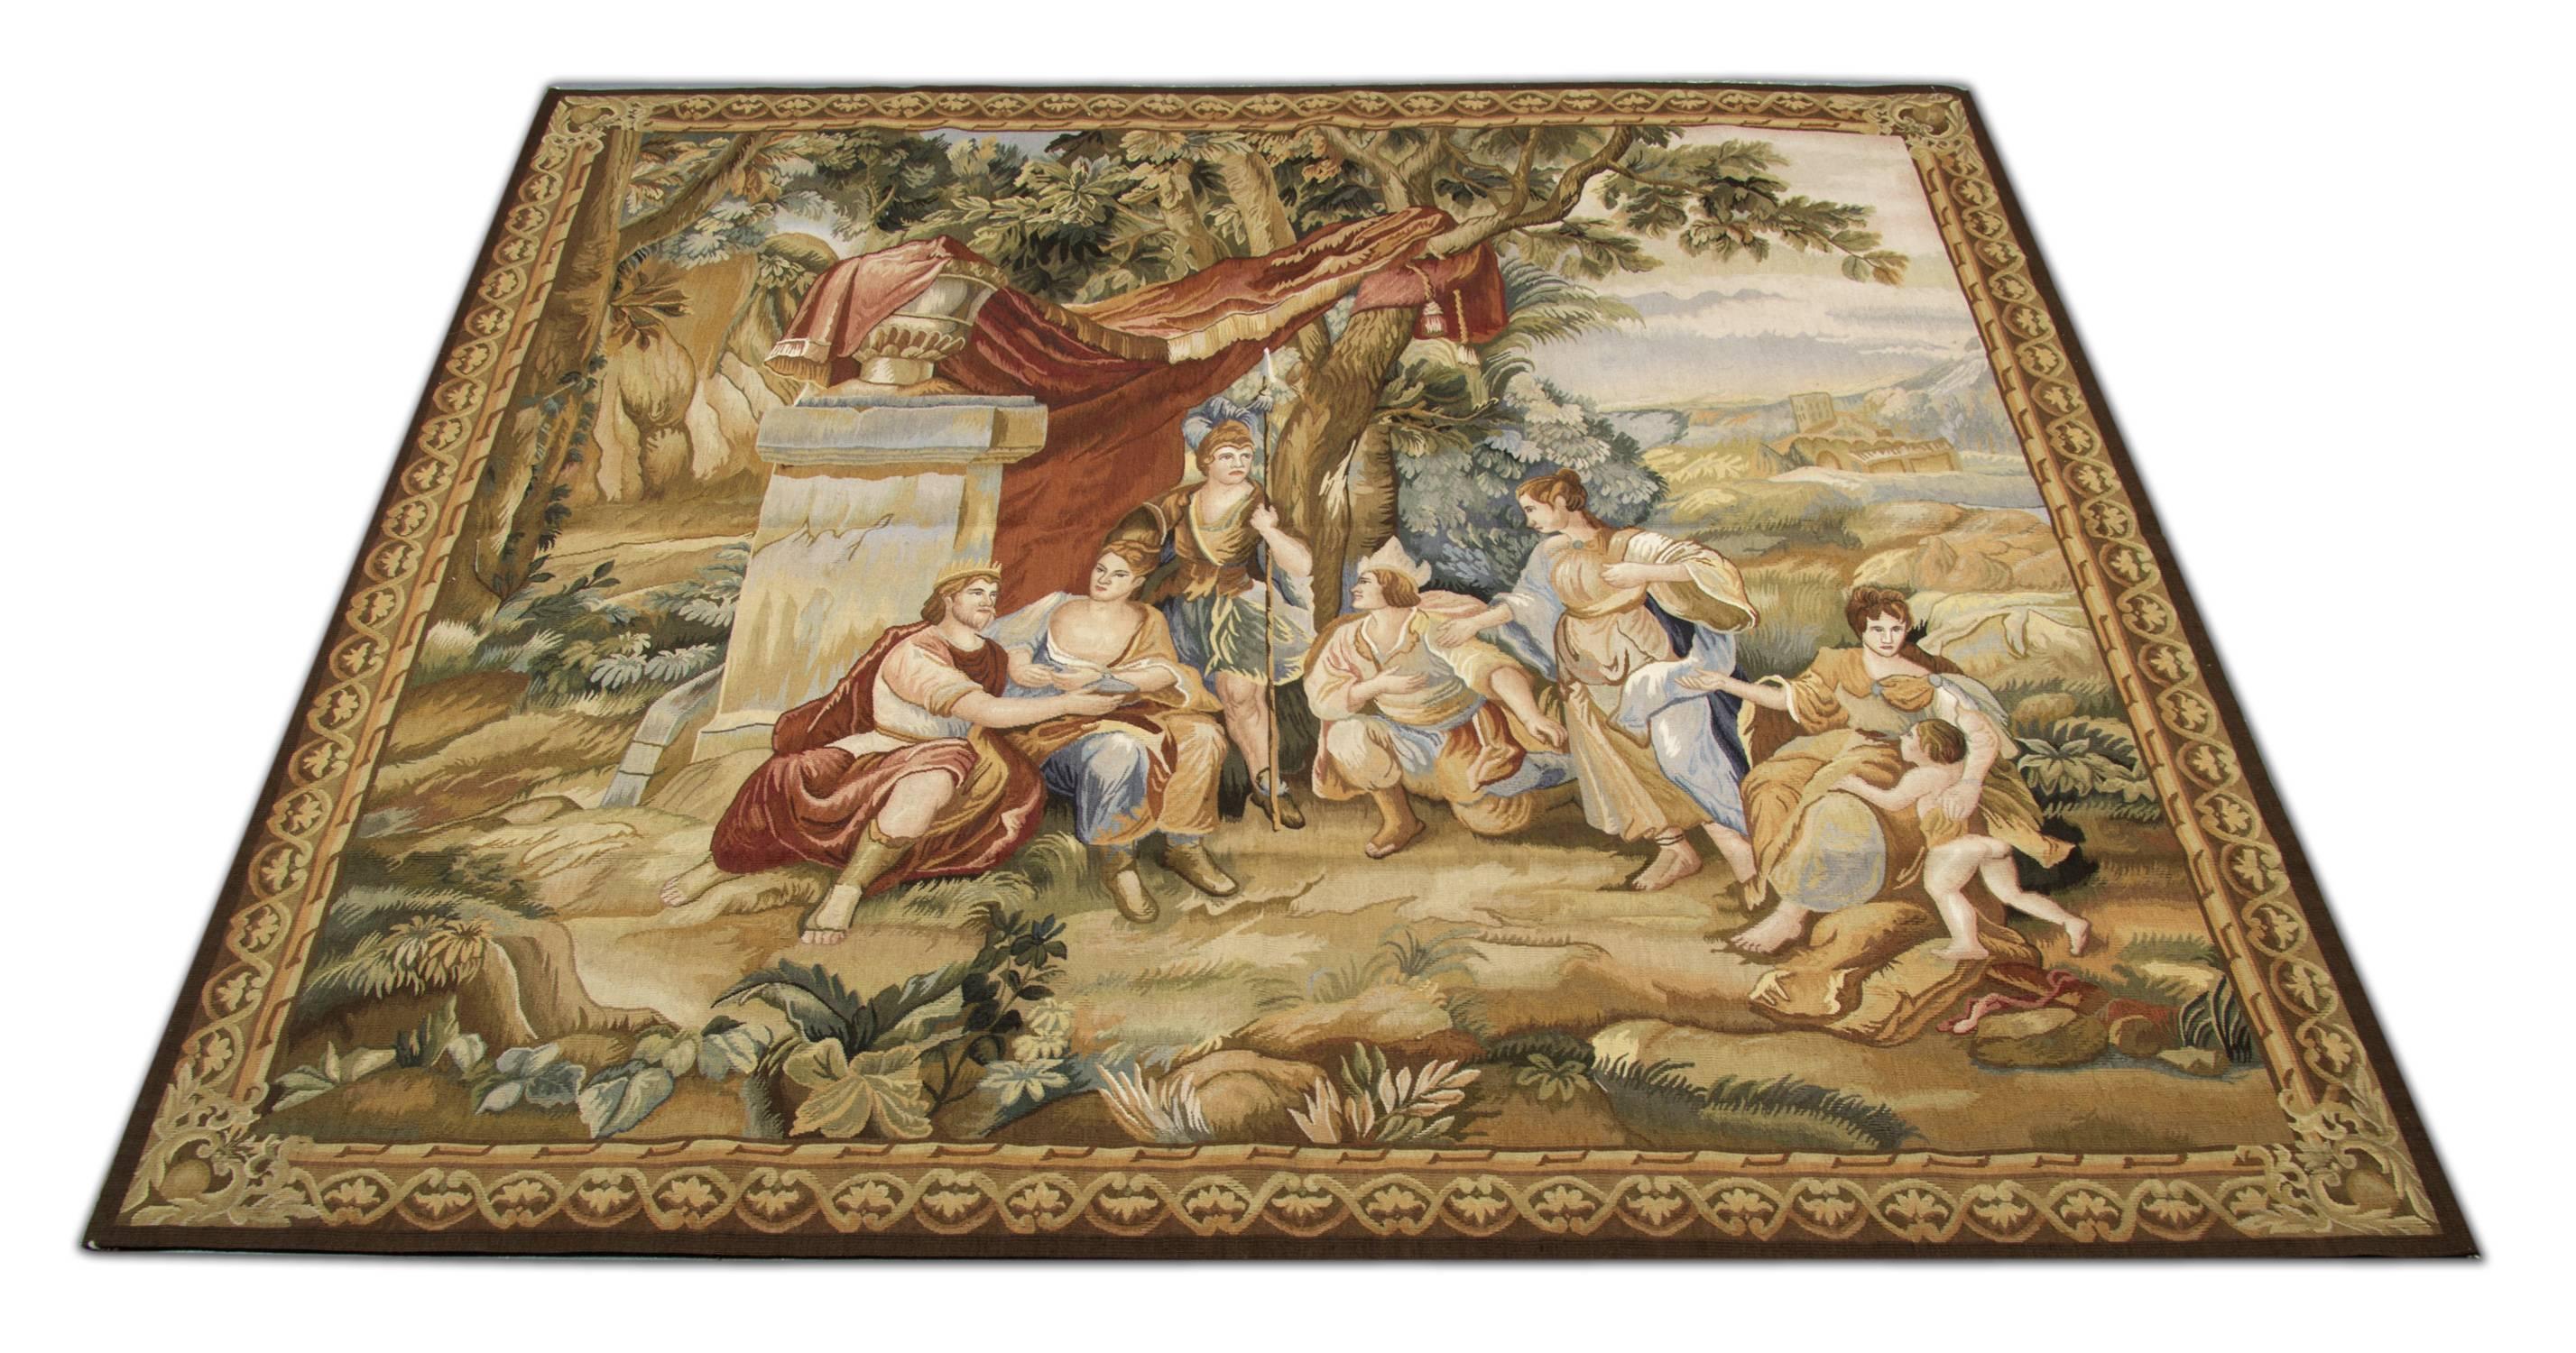 A fabulous 19th-century handwoven tapestry in excellent condition. The scene of celebration among nature. A similar technique is used for making the tapestry, as in Aubusson and Needlepoint in the flat weave role. These decorative area rugs are